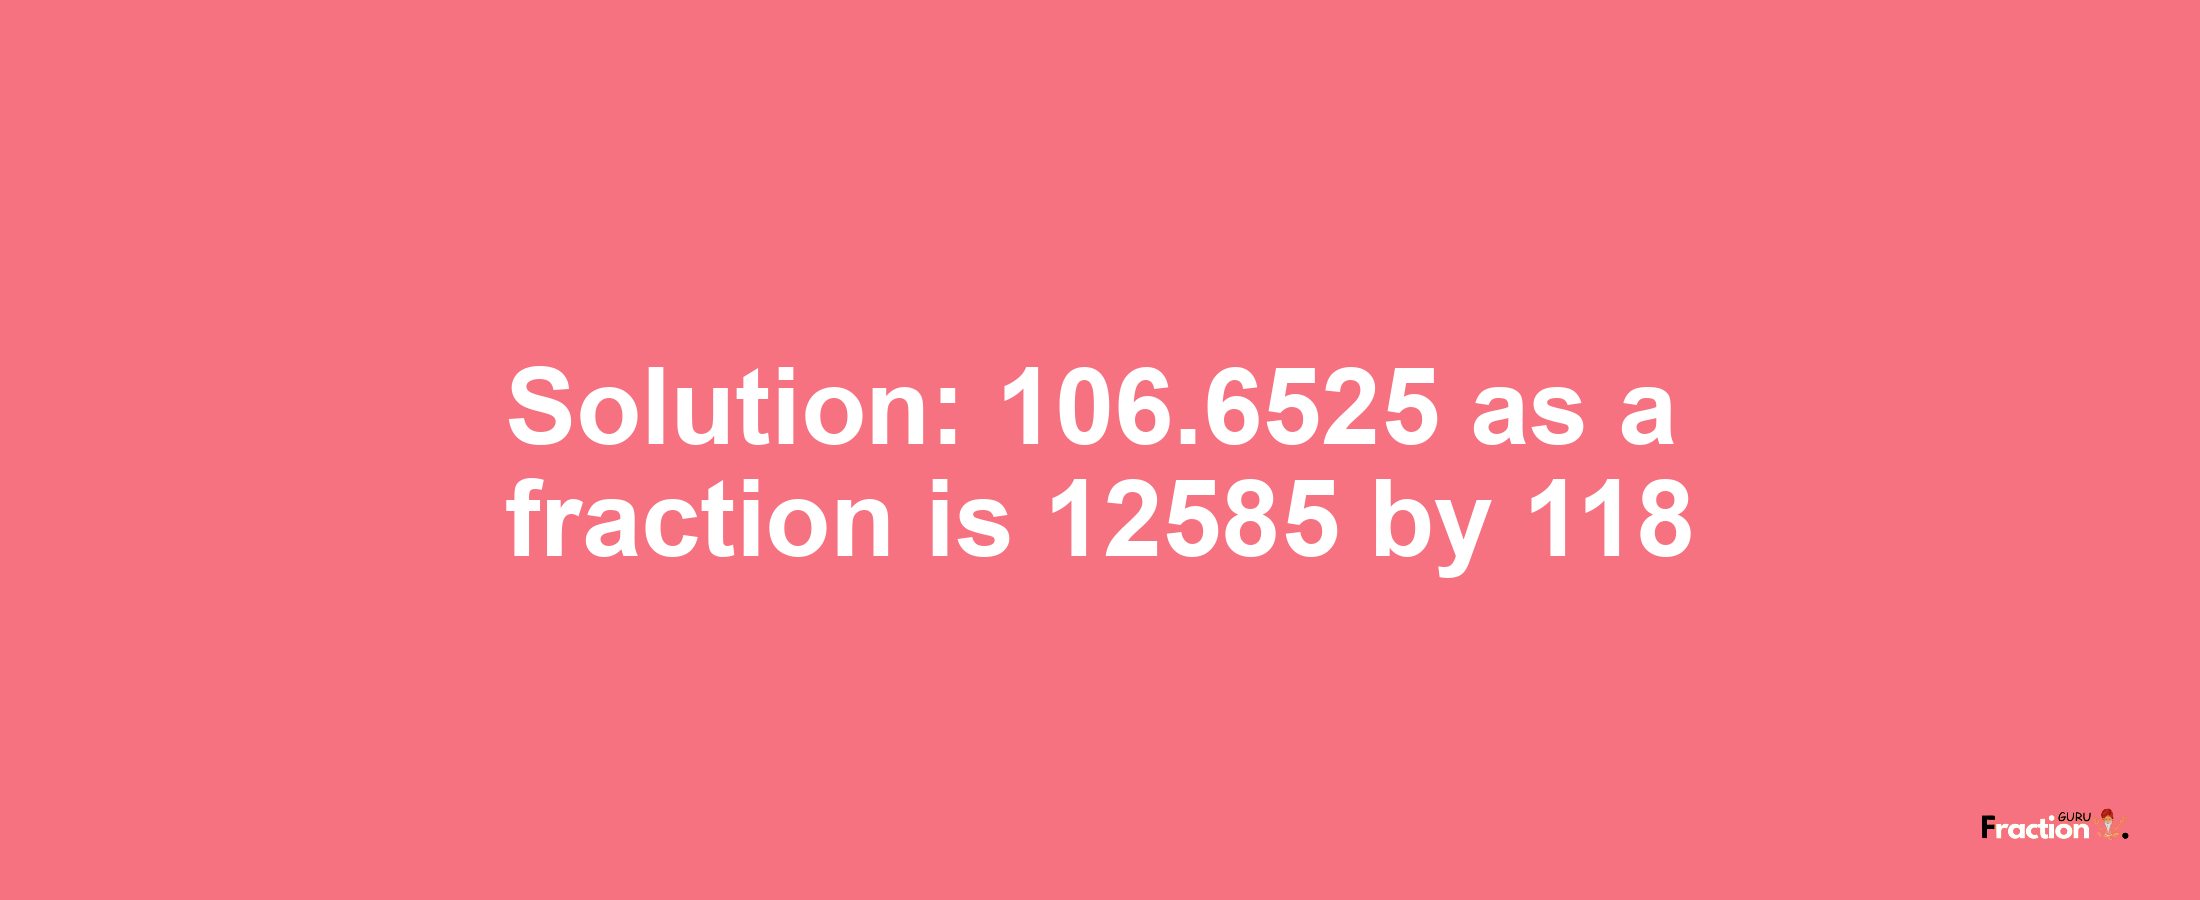 Solution:106.6525 as a fraction is 12585/118